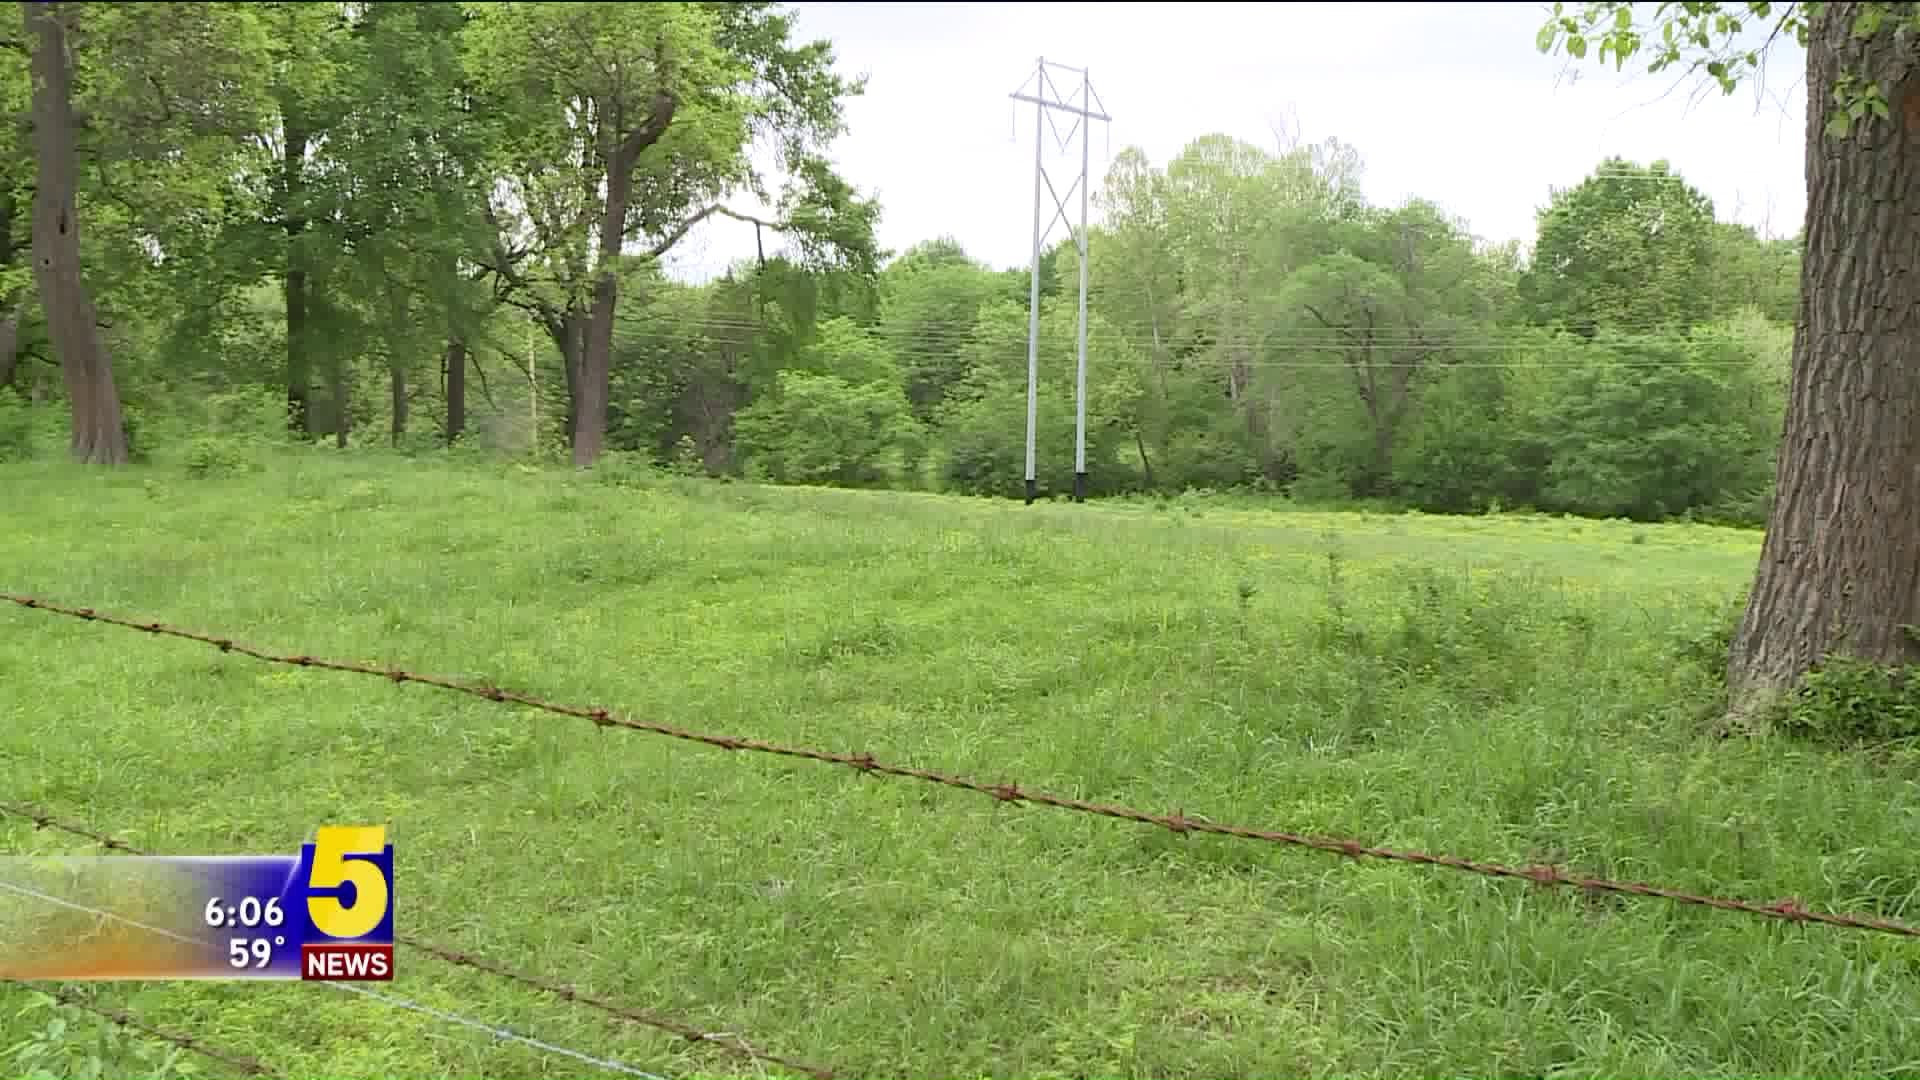 FAYETTEVILLE RESIDENTS CONCERNED ABOUT CELL TOWER